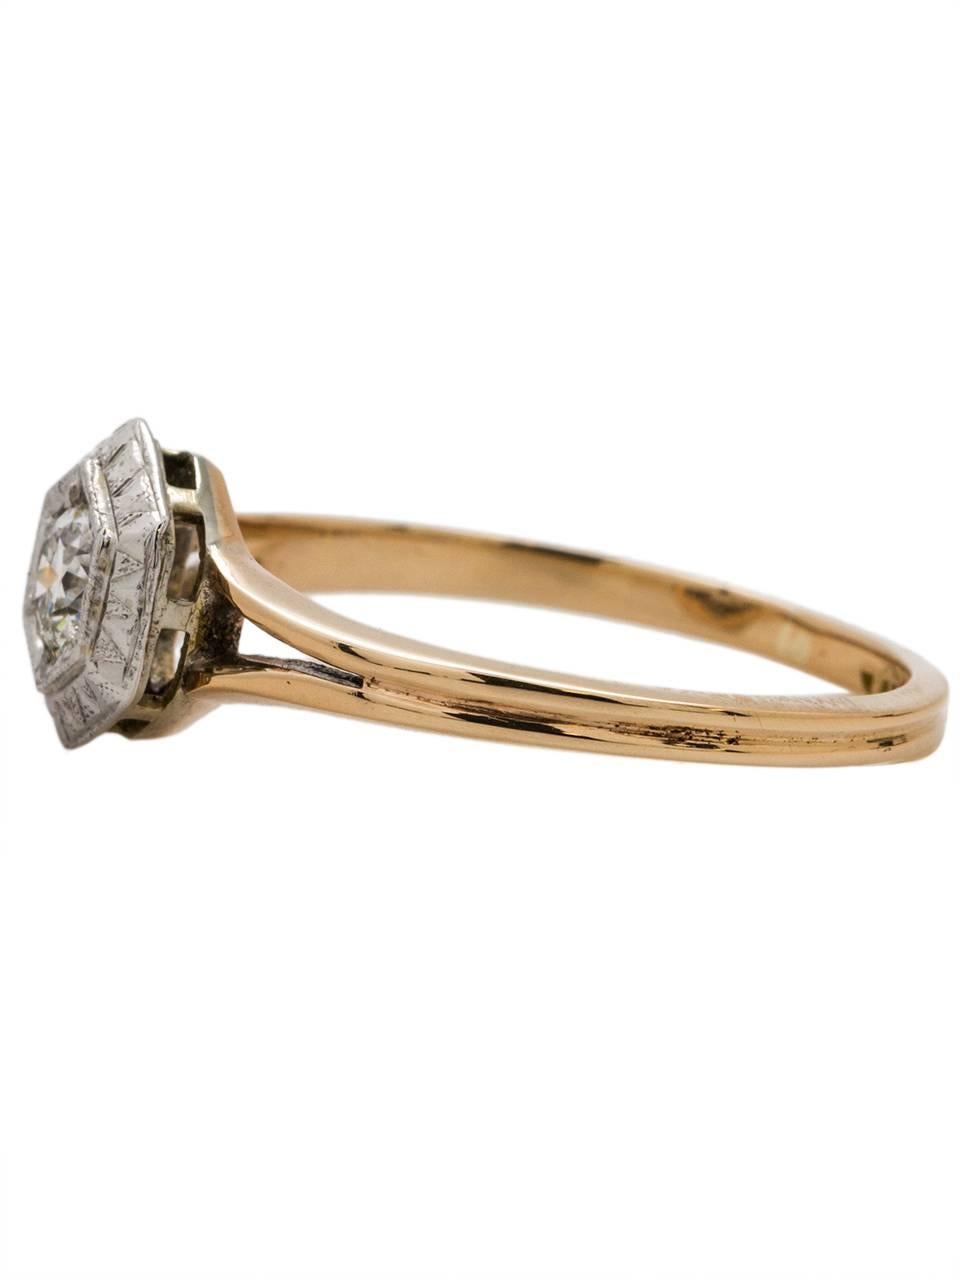 
Lovely vintage diamond engagement ring featuring a bright and lively 0.40ct Old European Cut, H-SI1. The center stone is accented by a finely engraved hexagonal bezel setting and split design. Would be fabulous paired with one of our vintage